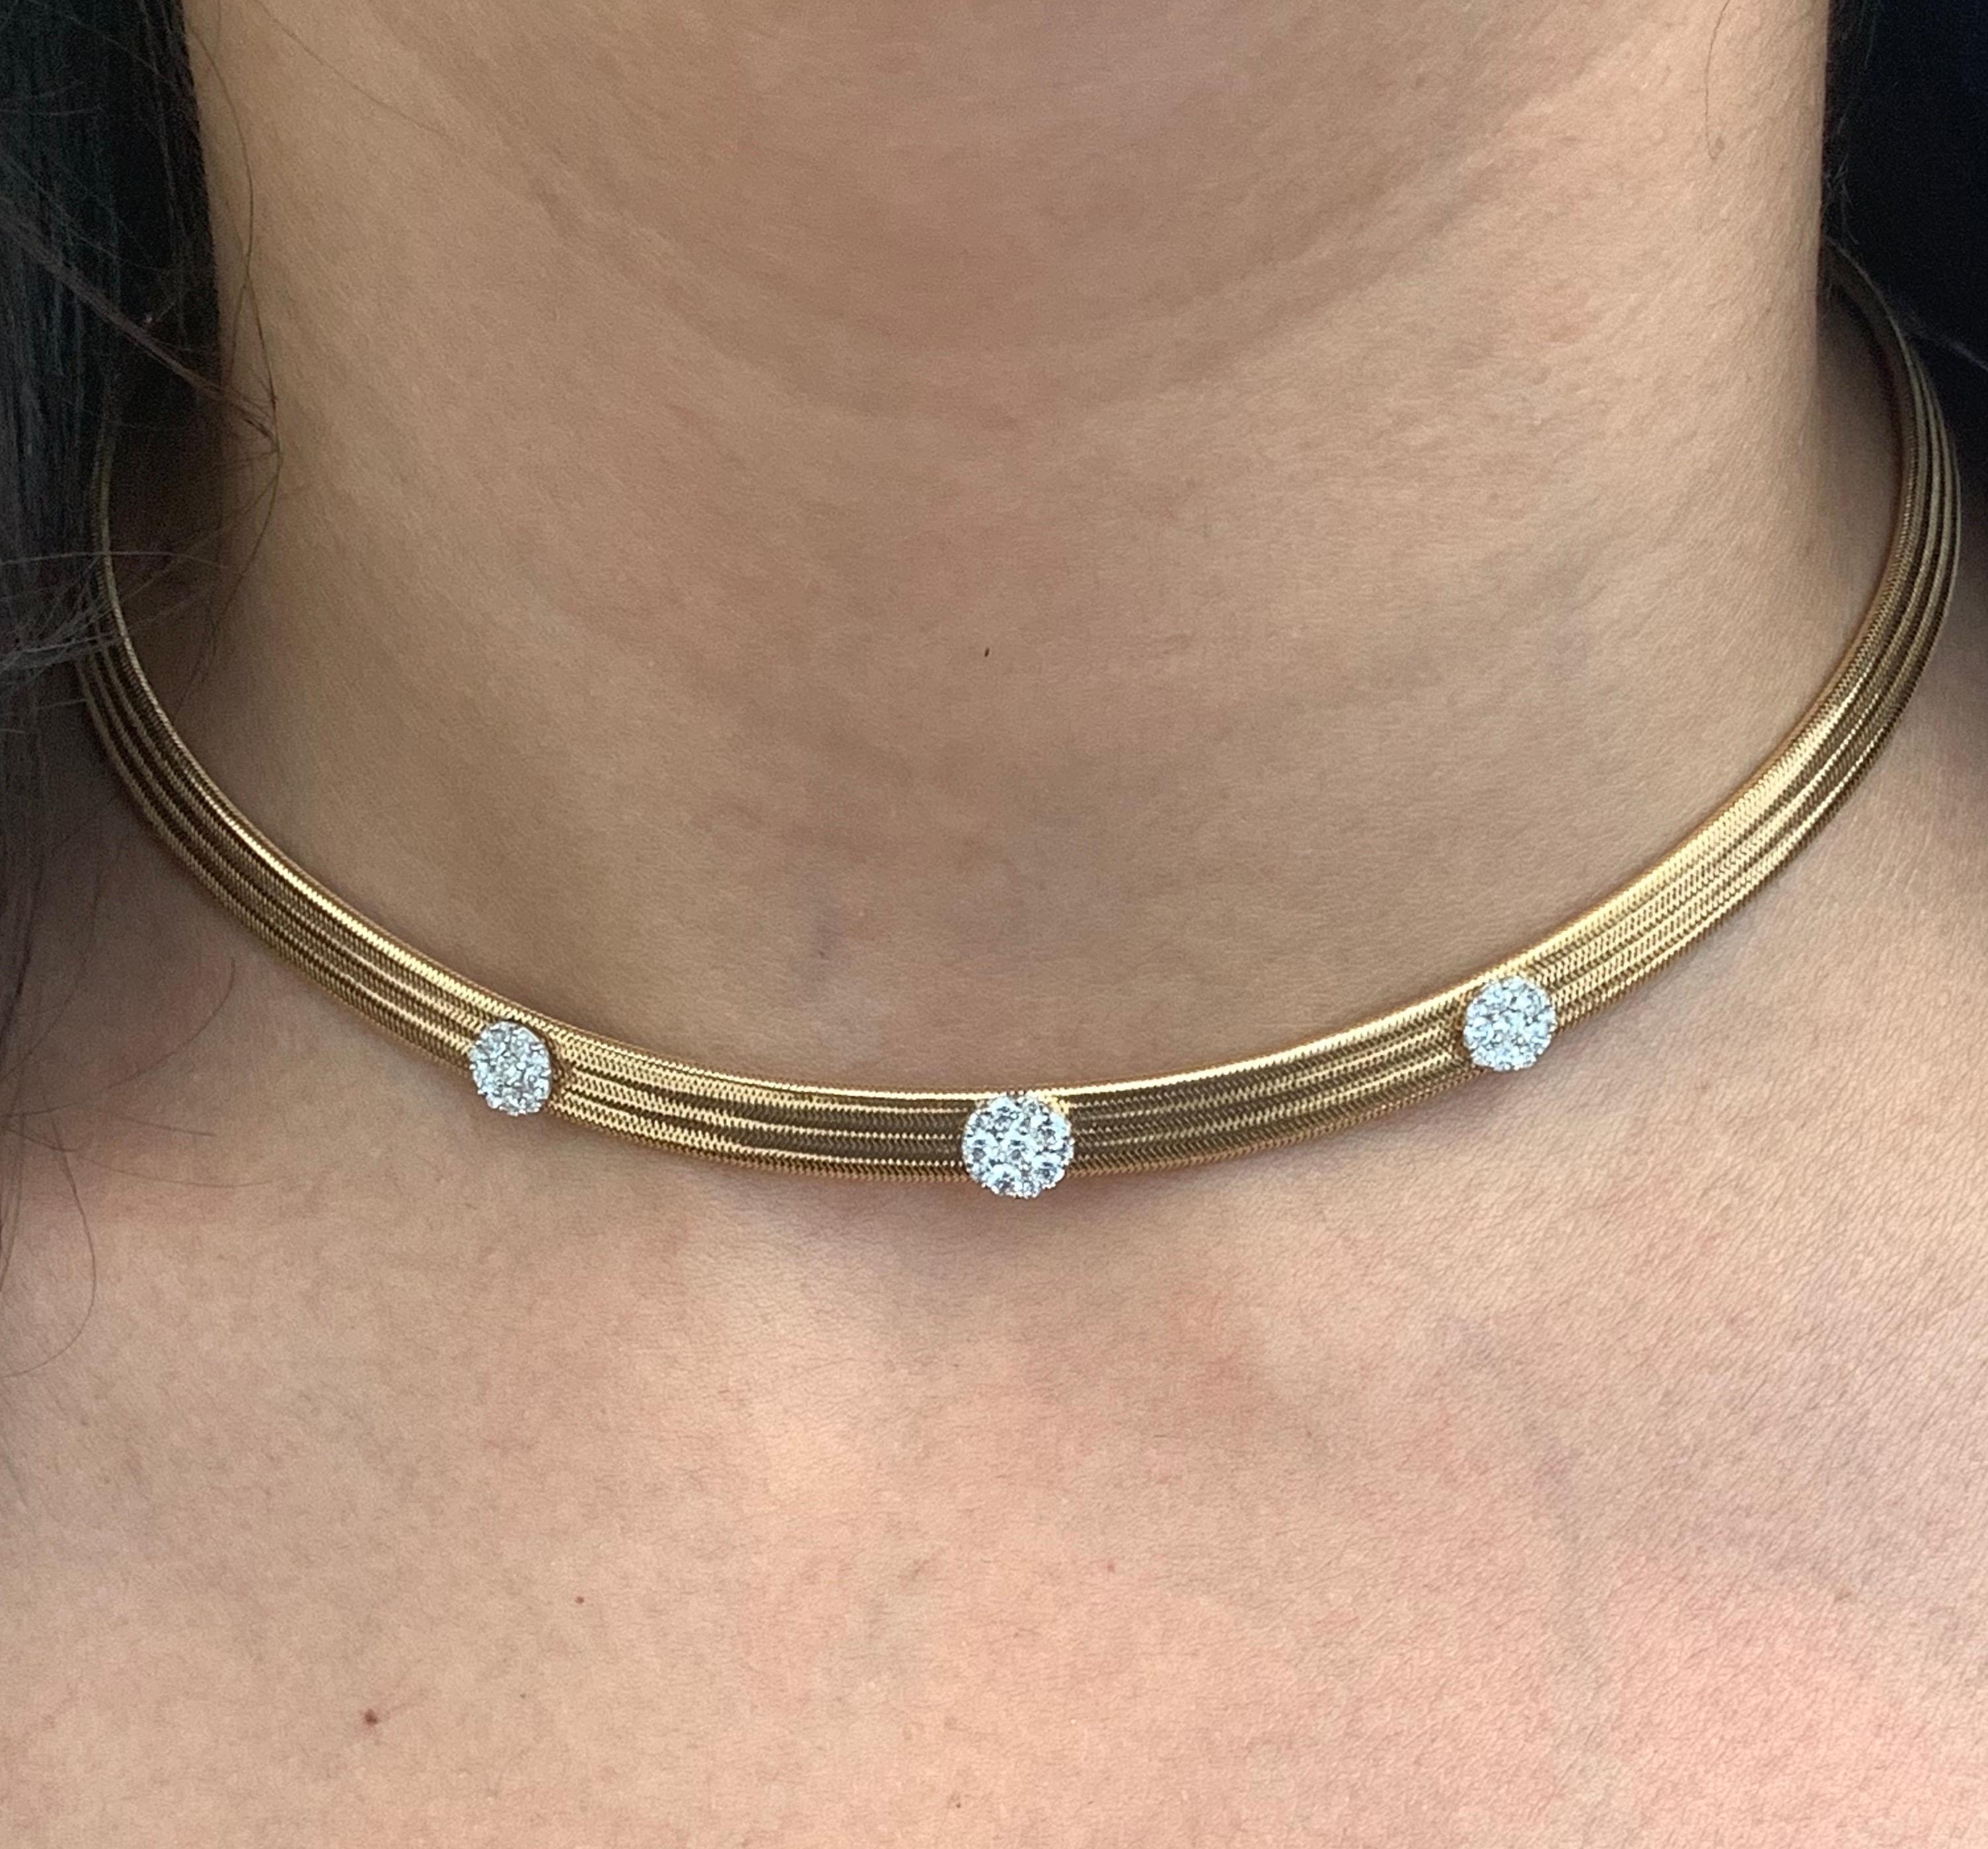 Material: 18K Two Tone Gold 
Diamond Details: 32 Brilliant Round White Diamonds at 0.7 Carats - Clarity: SI / Color: H-I

The choker is 13.5 inches long with 2.5 inches of chain in the back which allows it to be worn anywhere from 13.5 inches to 16